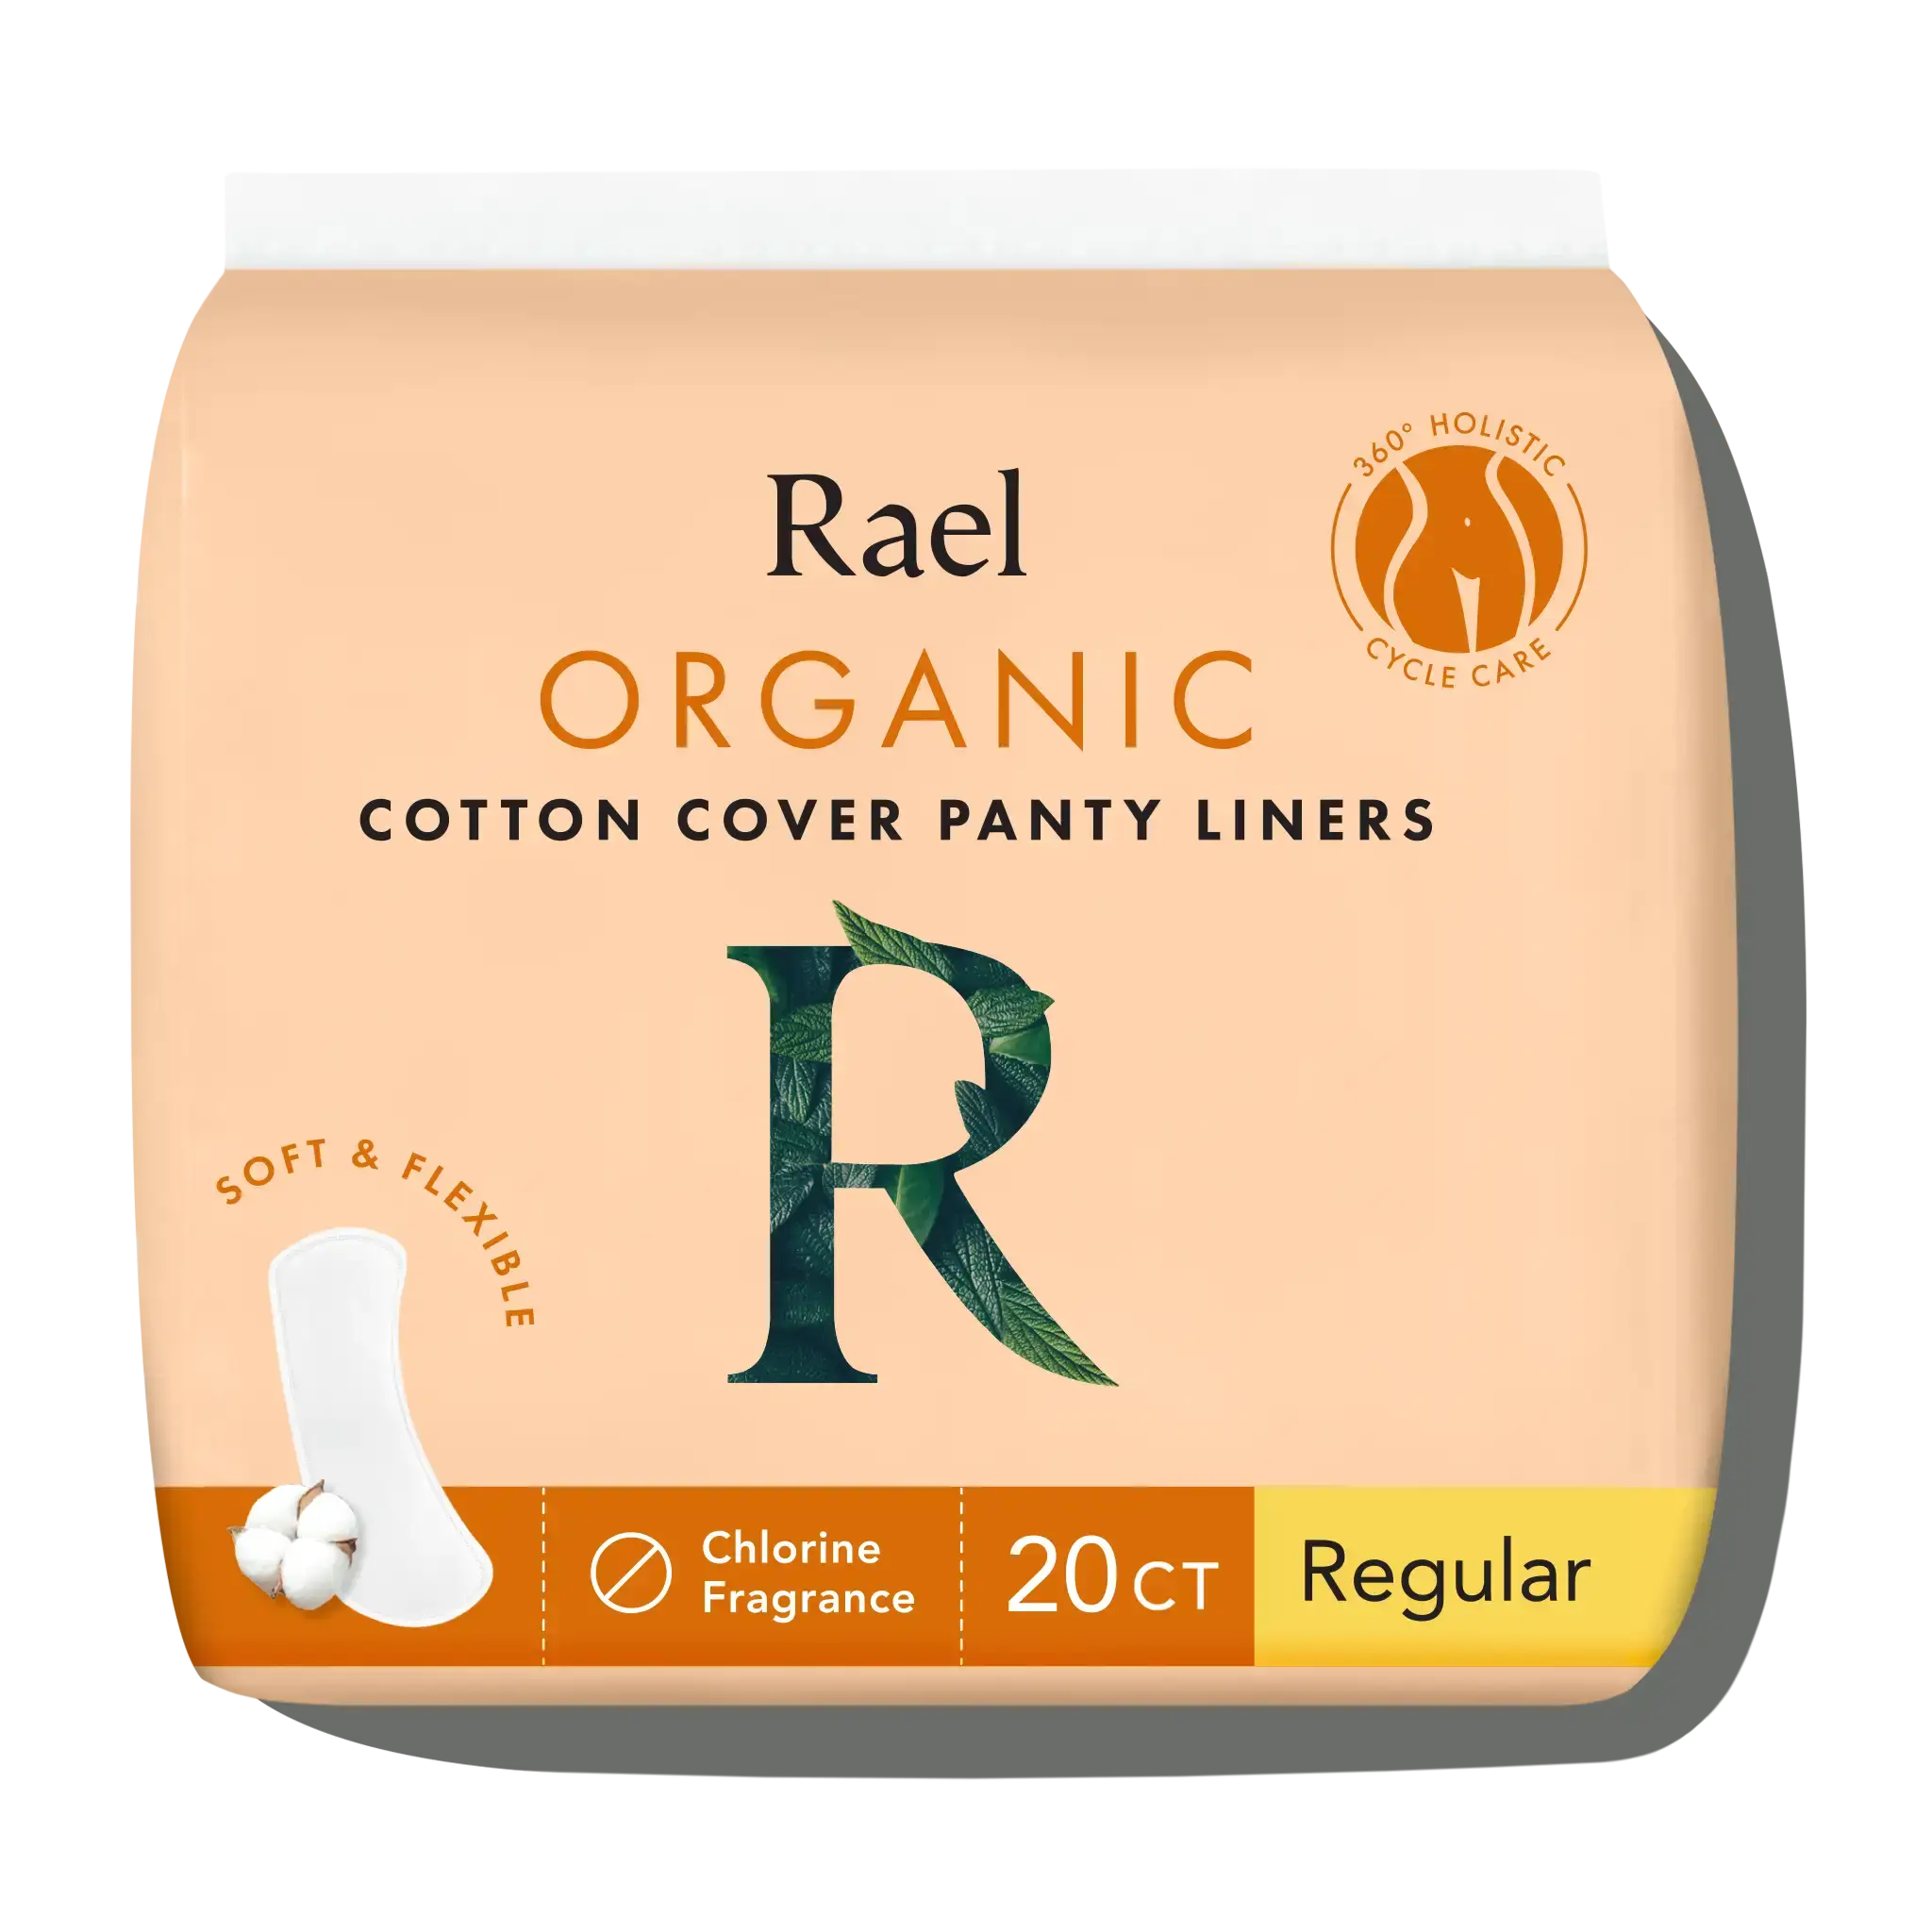 Rael Organic Regular Cotton Cover Panty Liners 20 Count, 20 ct - Foods Co.